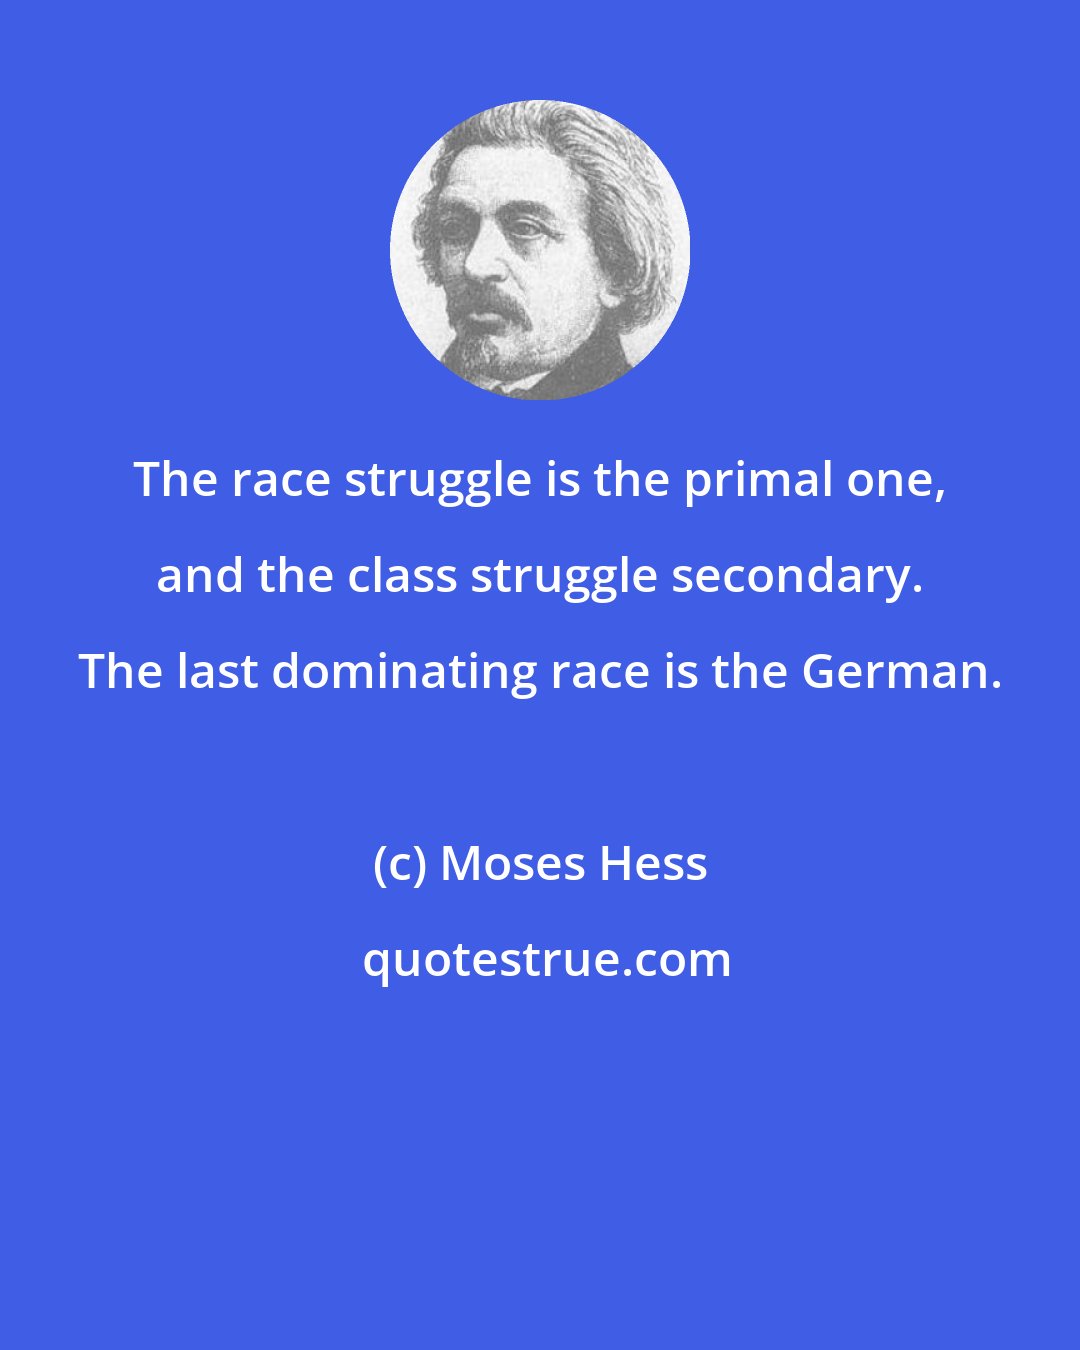 Moses Hess: The race struggle is the primal one, and the class struggle secondary. The last dominating race is the German.